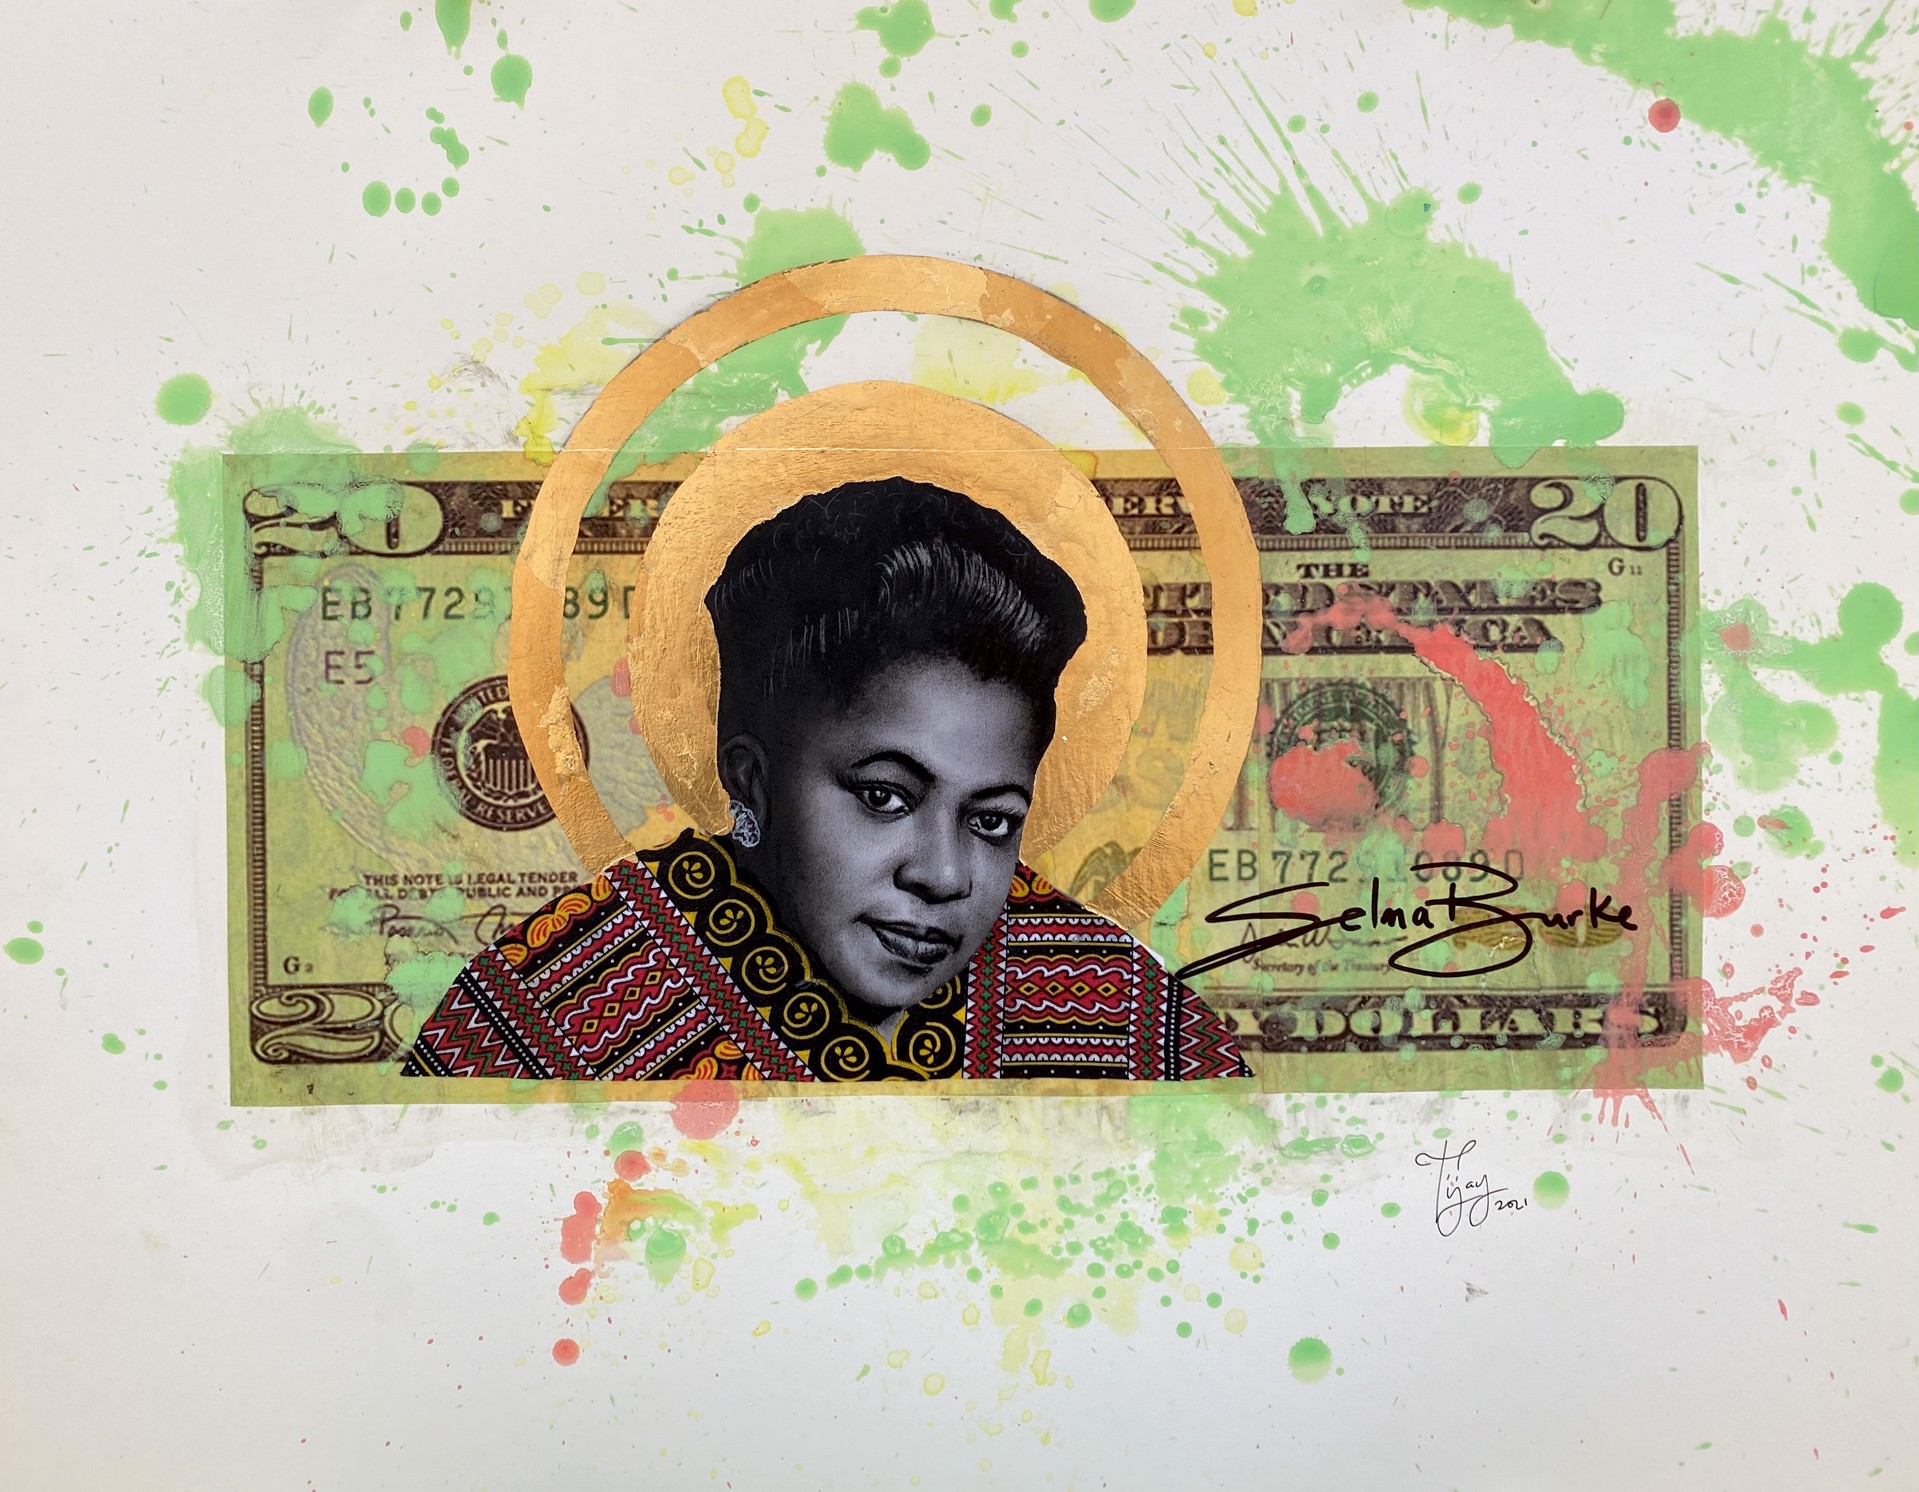 The Pride of Our Village, Selma Burke by Tijay Mohammed